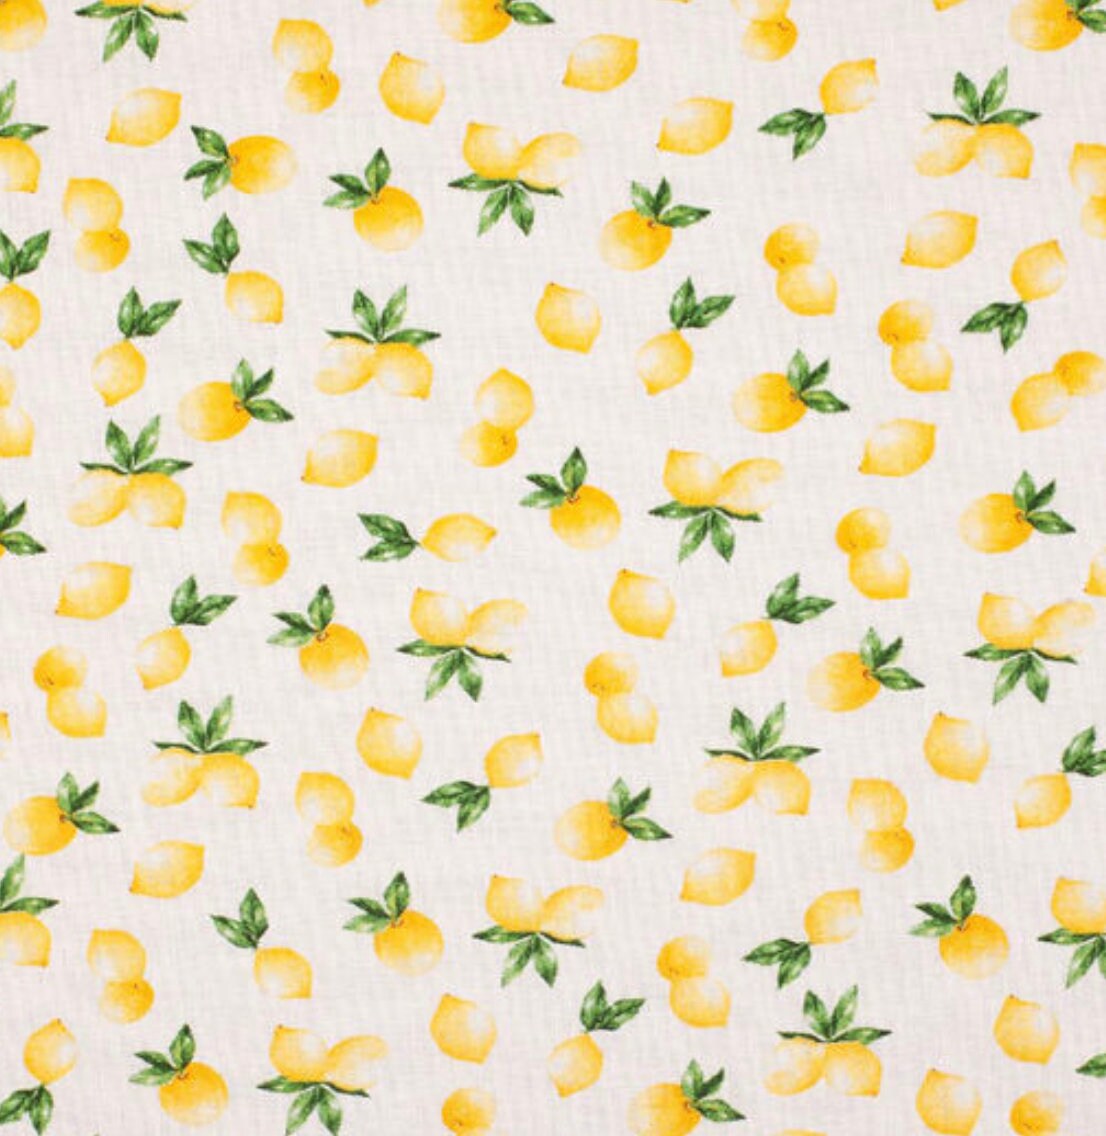 Novelty Lemon Toss Cotton Fabric by the Yard FQ Fat Quarter - Etsy